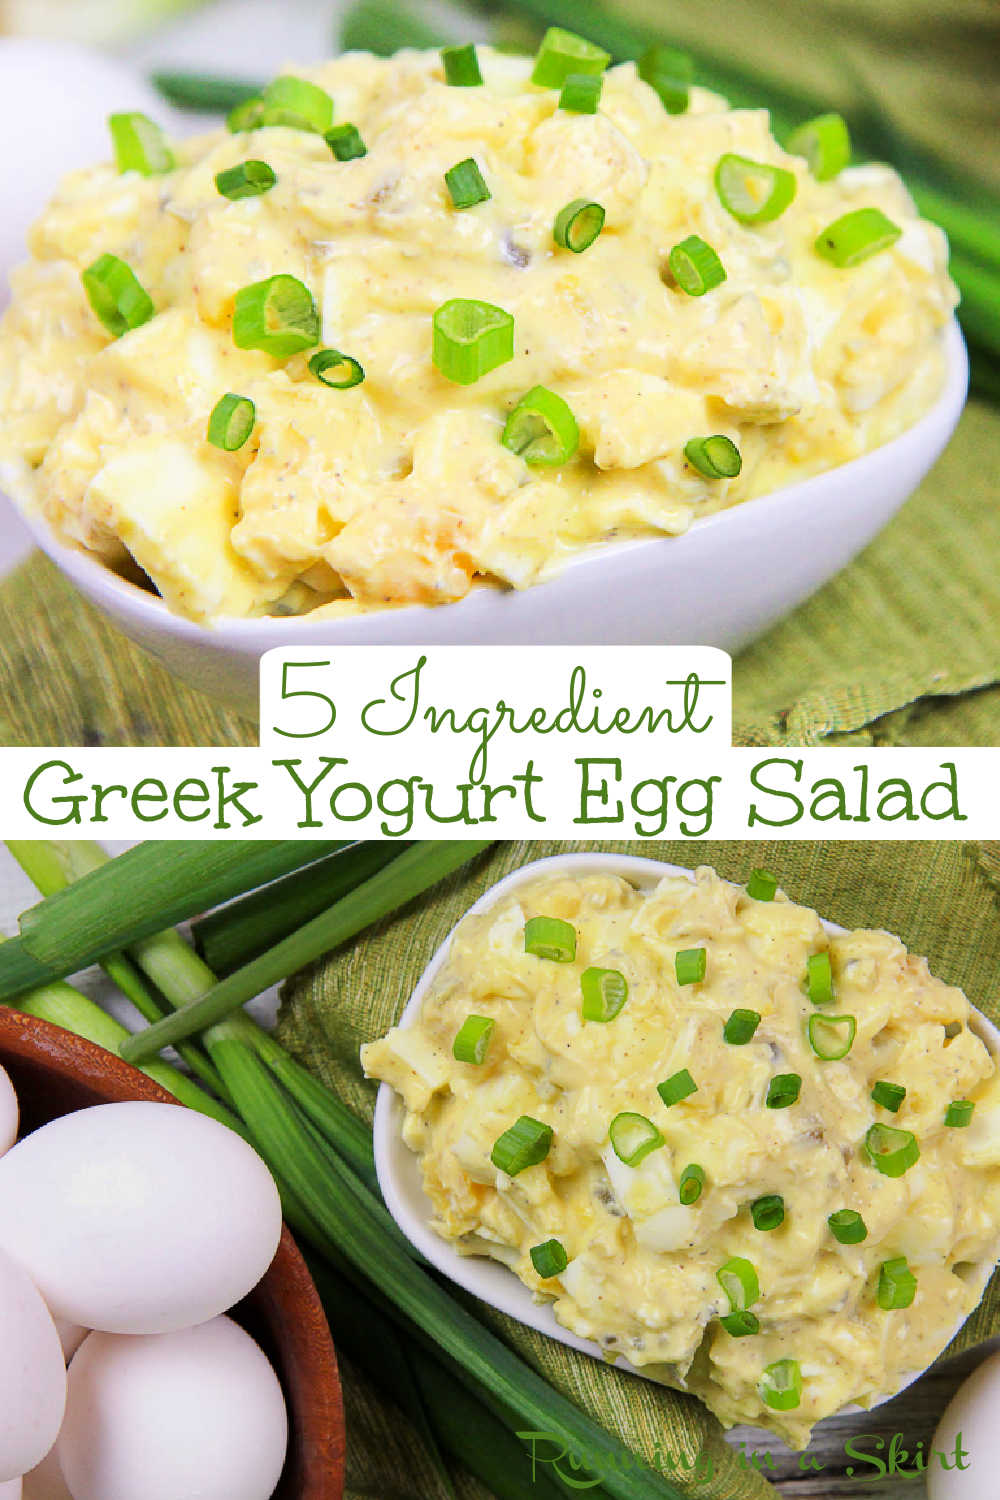 5 Ingredient Healthy (No Mayo!) Greek Yogurt Egg Salad recipe - An easy and simple vegetarian meal idea. Great for a sandwich, lunches, dinners and fun meals. Uses hard boiled eggs! Low carb, vegetarian, gluten free and clean eating / Running in a Skirt via @juliewunder